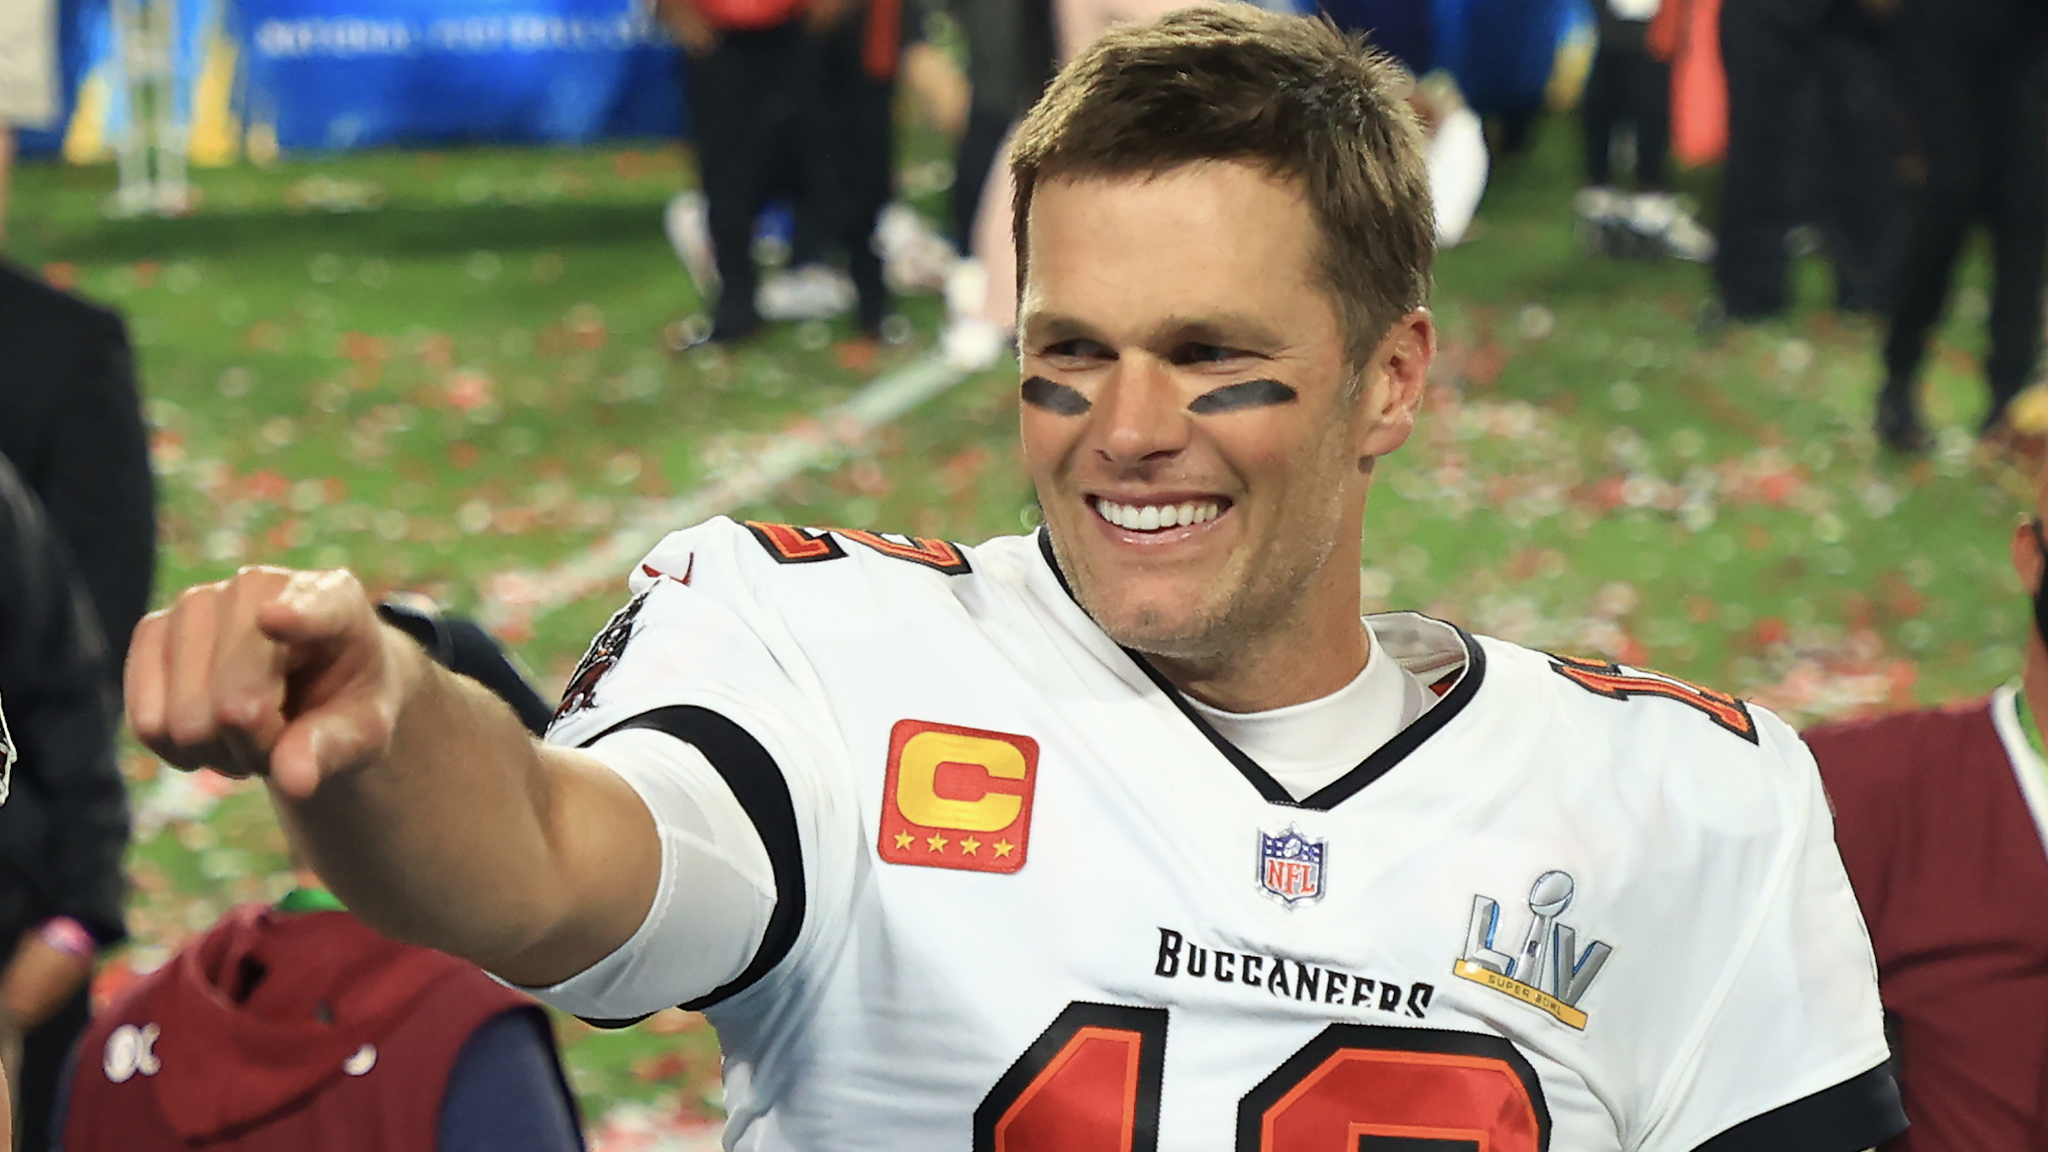 TAMPA, FLORIDA - FEBRUARY 07: Tom Brady #12 of the Tampa Bay Buccaneers celebrates after defeating the Kansas City Chiefs in Super Bowl LV at Raymond James Stadium on February 07, 2021 in Tampa, Florida. The Buccaneers defeated the Chiefs 31-9.